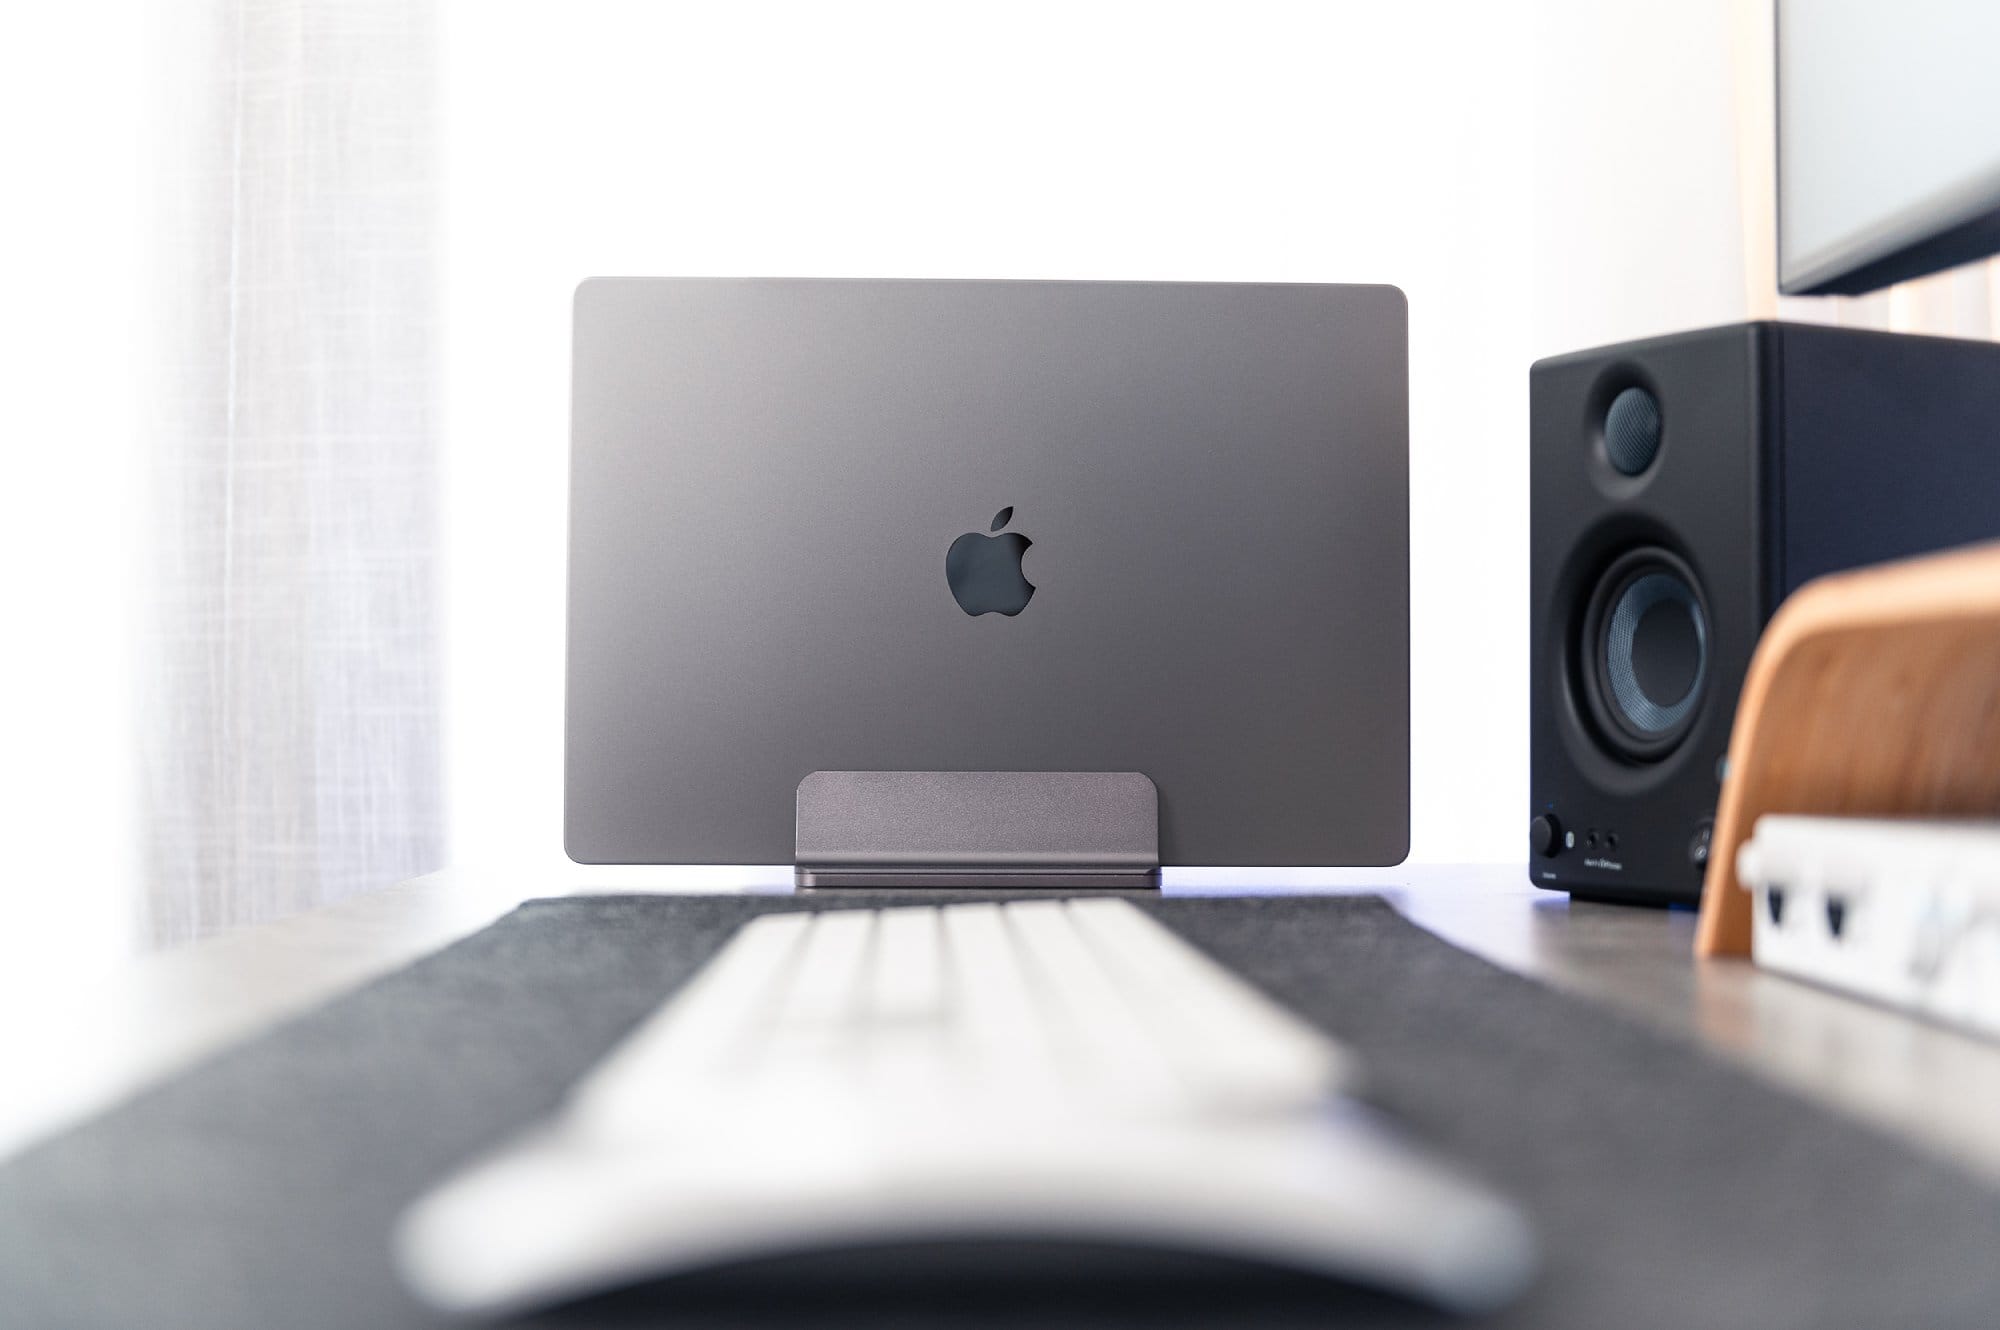 A focused view of a closed MacBook on a stand on a desk, with a blurred foreground showing part of a keyboard and a speaker in the background, all in a bright office setting with a window on the left side